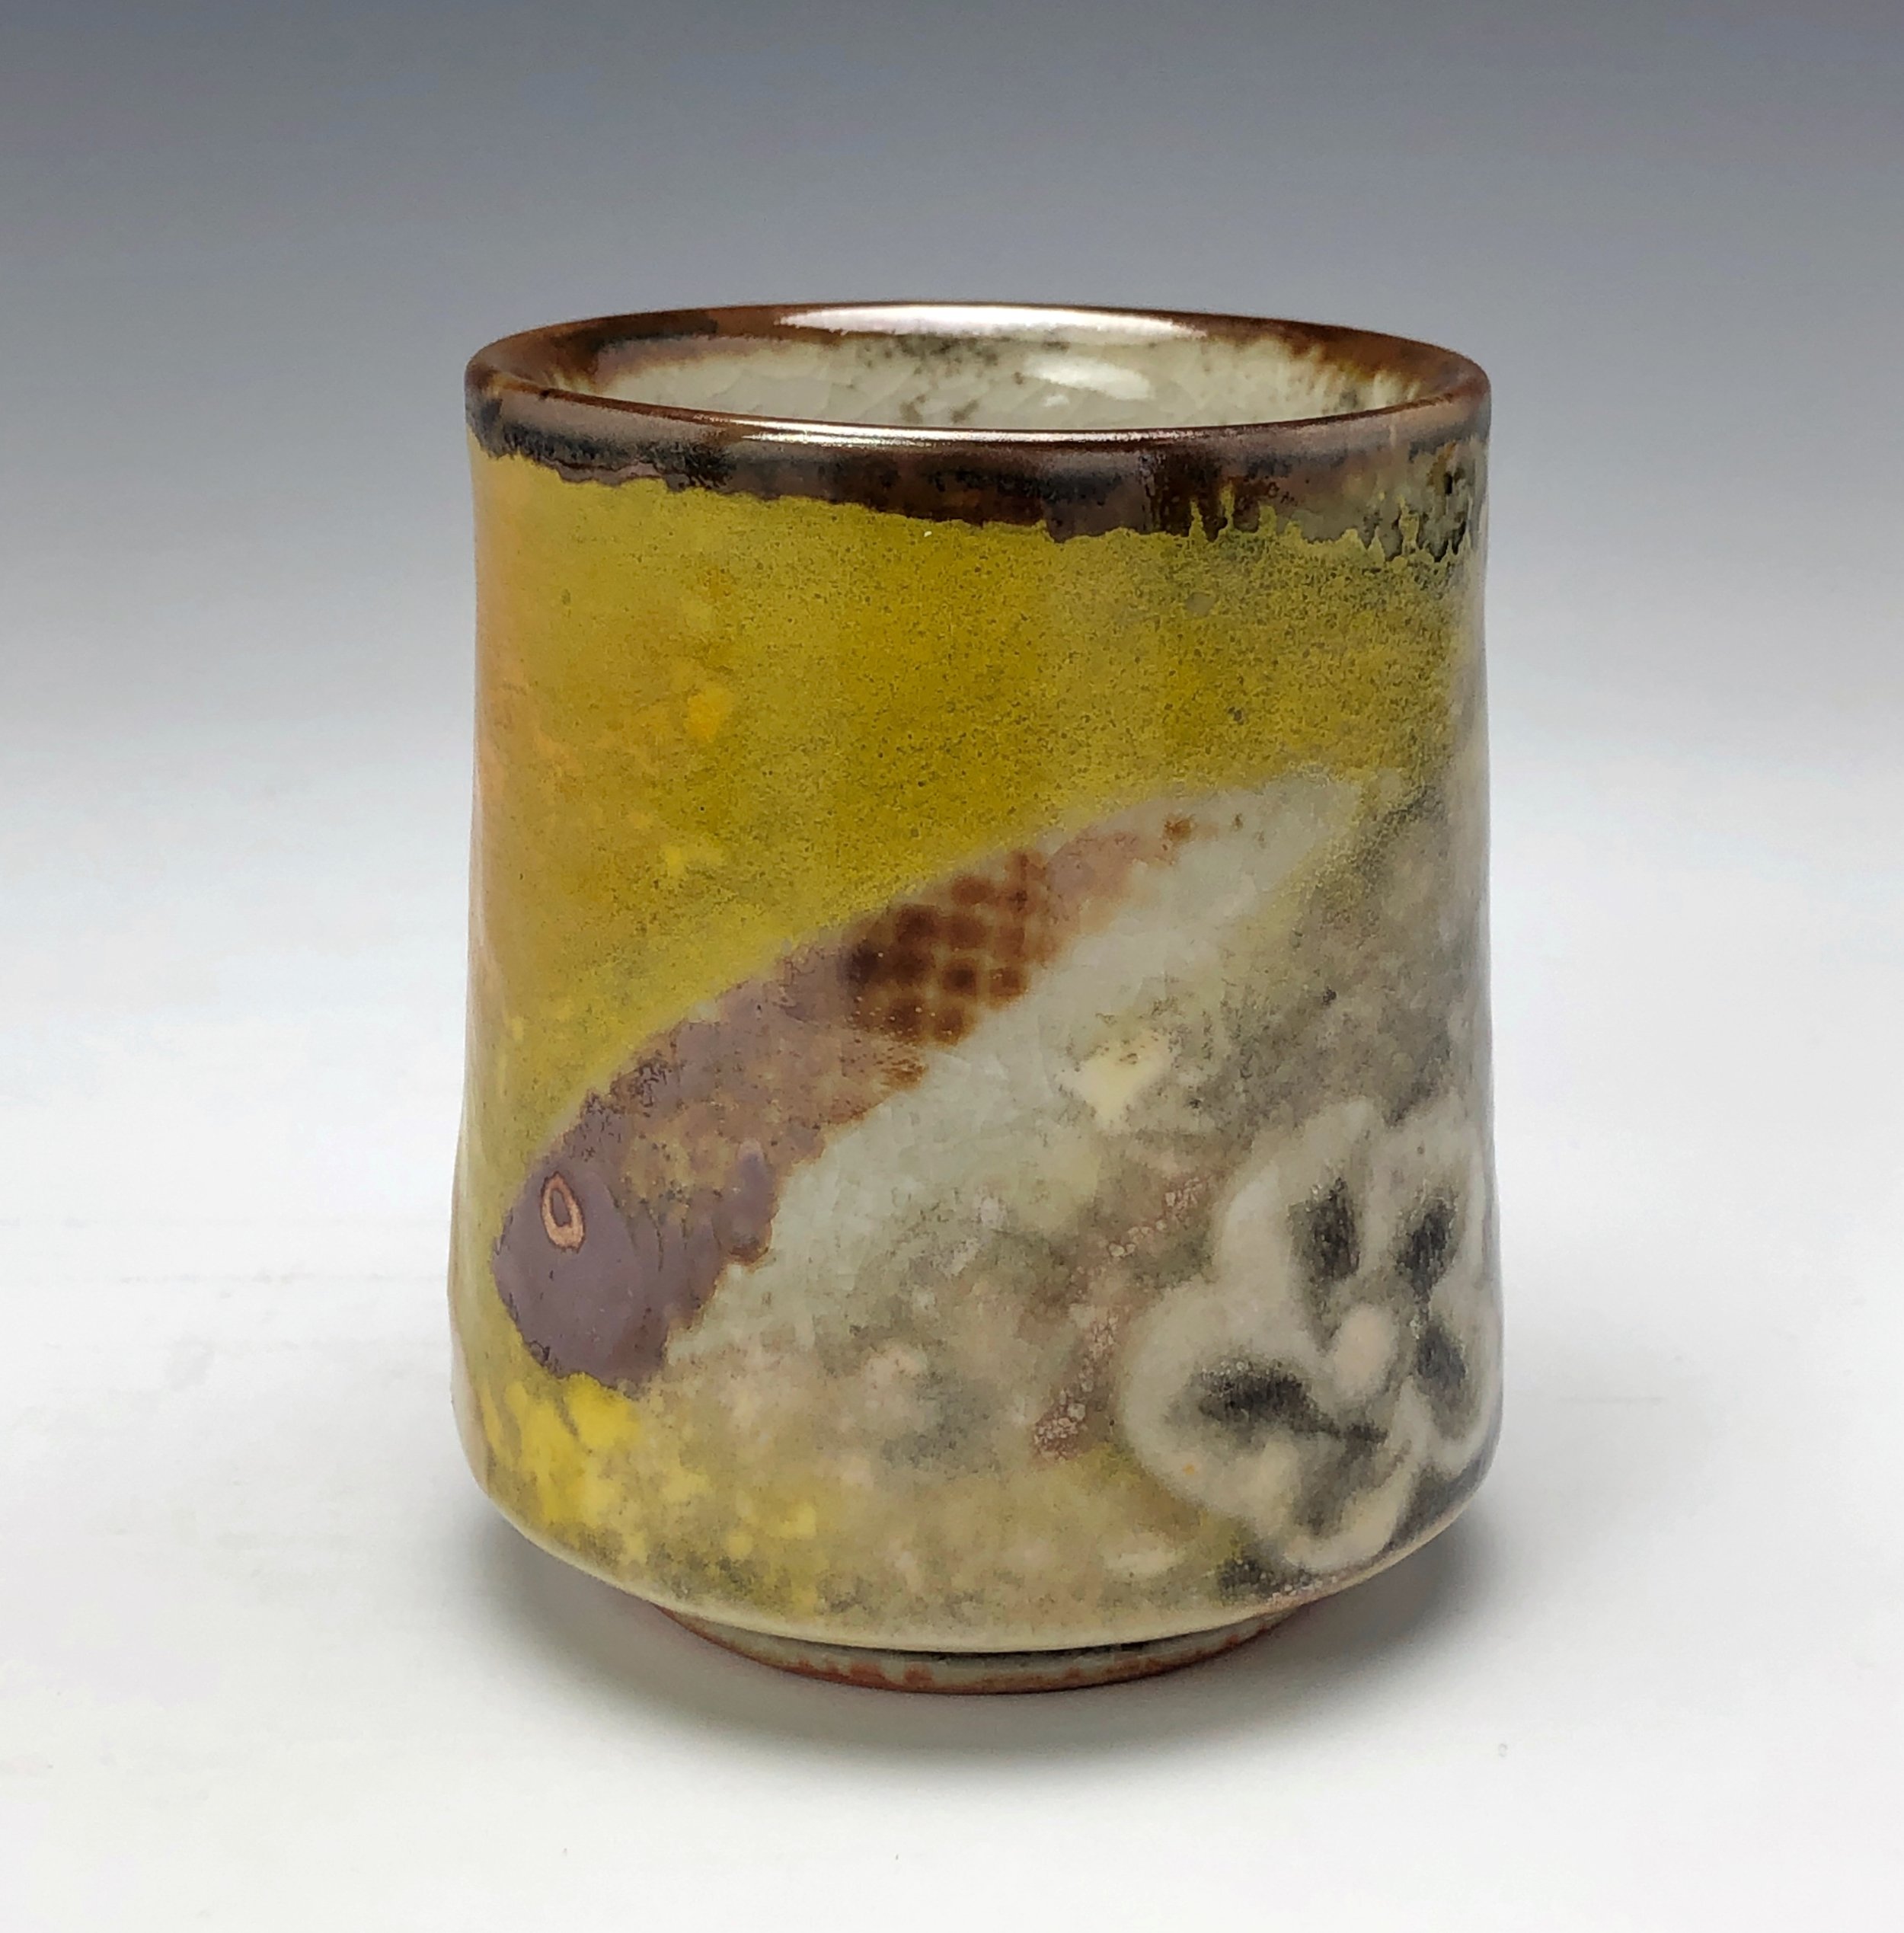  Bruce Gholson, Bulldog Pottery, Seagrove, North Carolina   Yunomi 3 - Casual drinking cup made from porcelain with Iron Luster Fish. Ceramic cup also has swipes of yellow and blue with a cobalt blue transfer. A textural shino is also glazed onto the